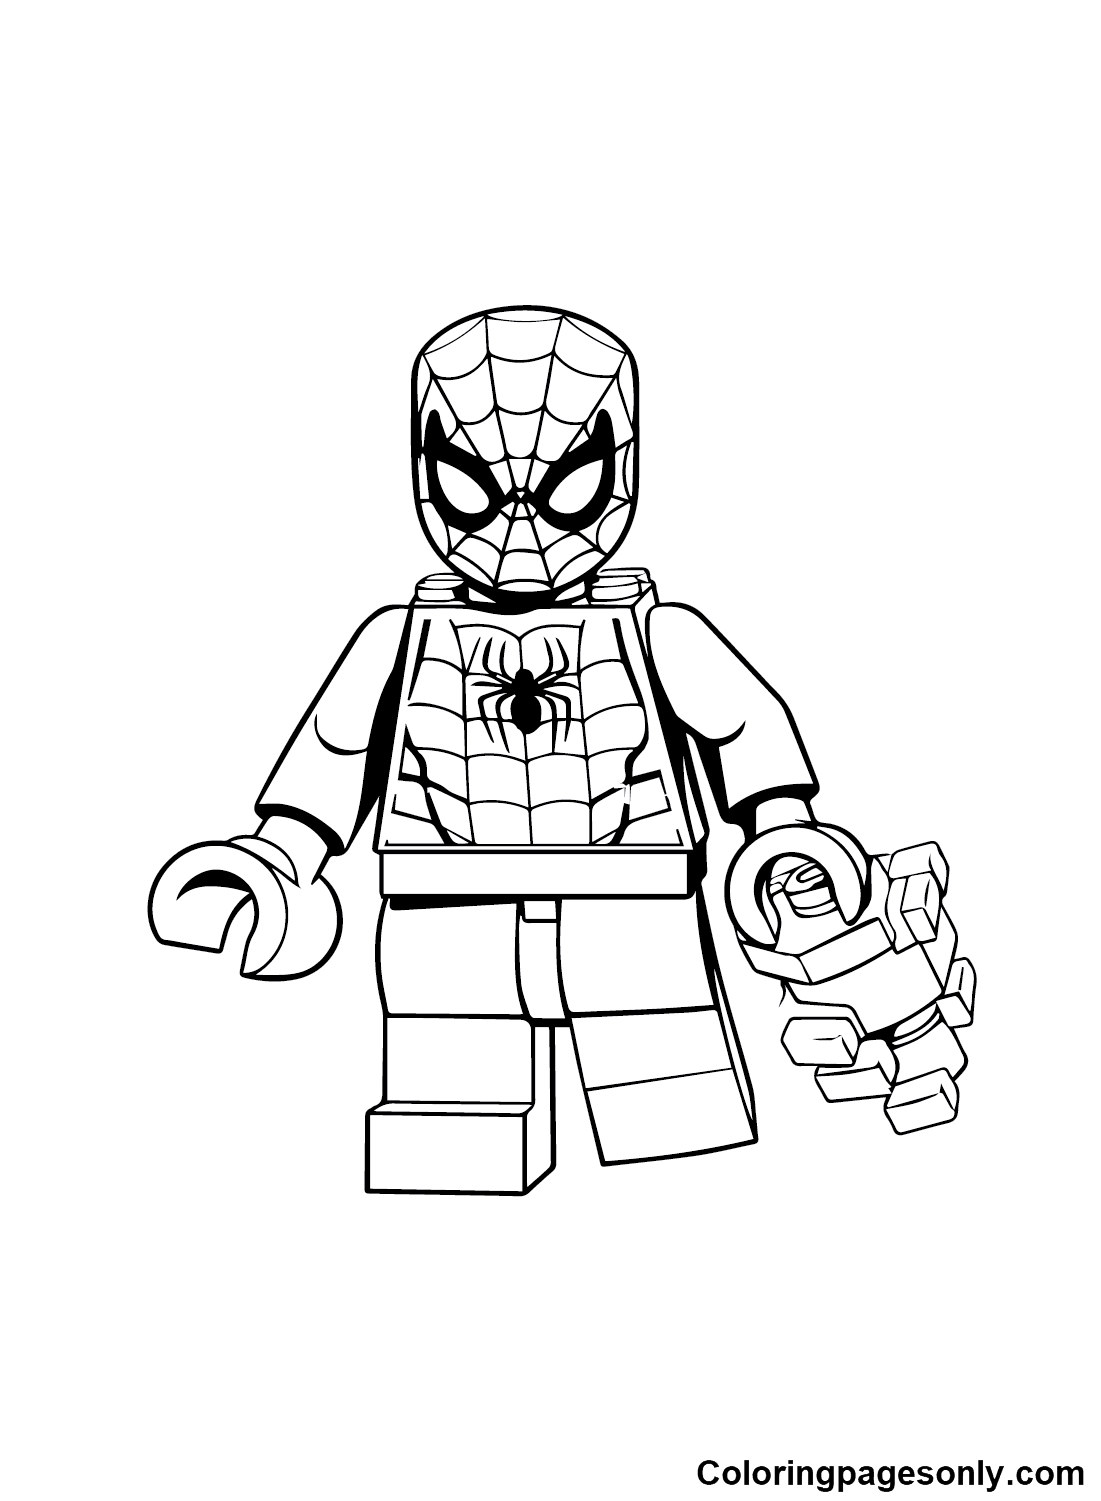 Lego spiderman coloring pages printable for free download